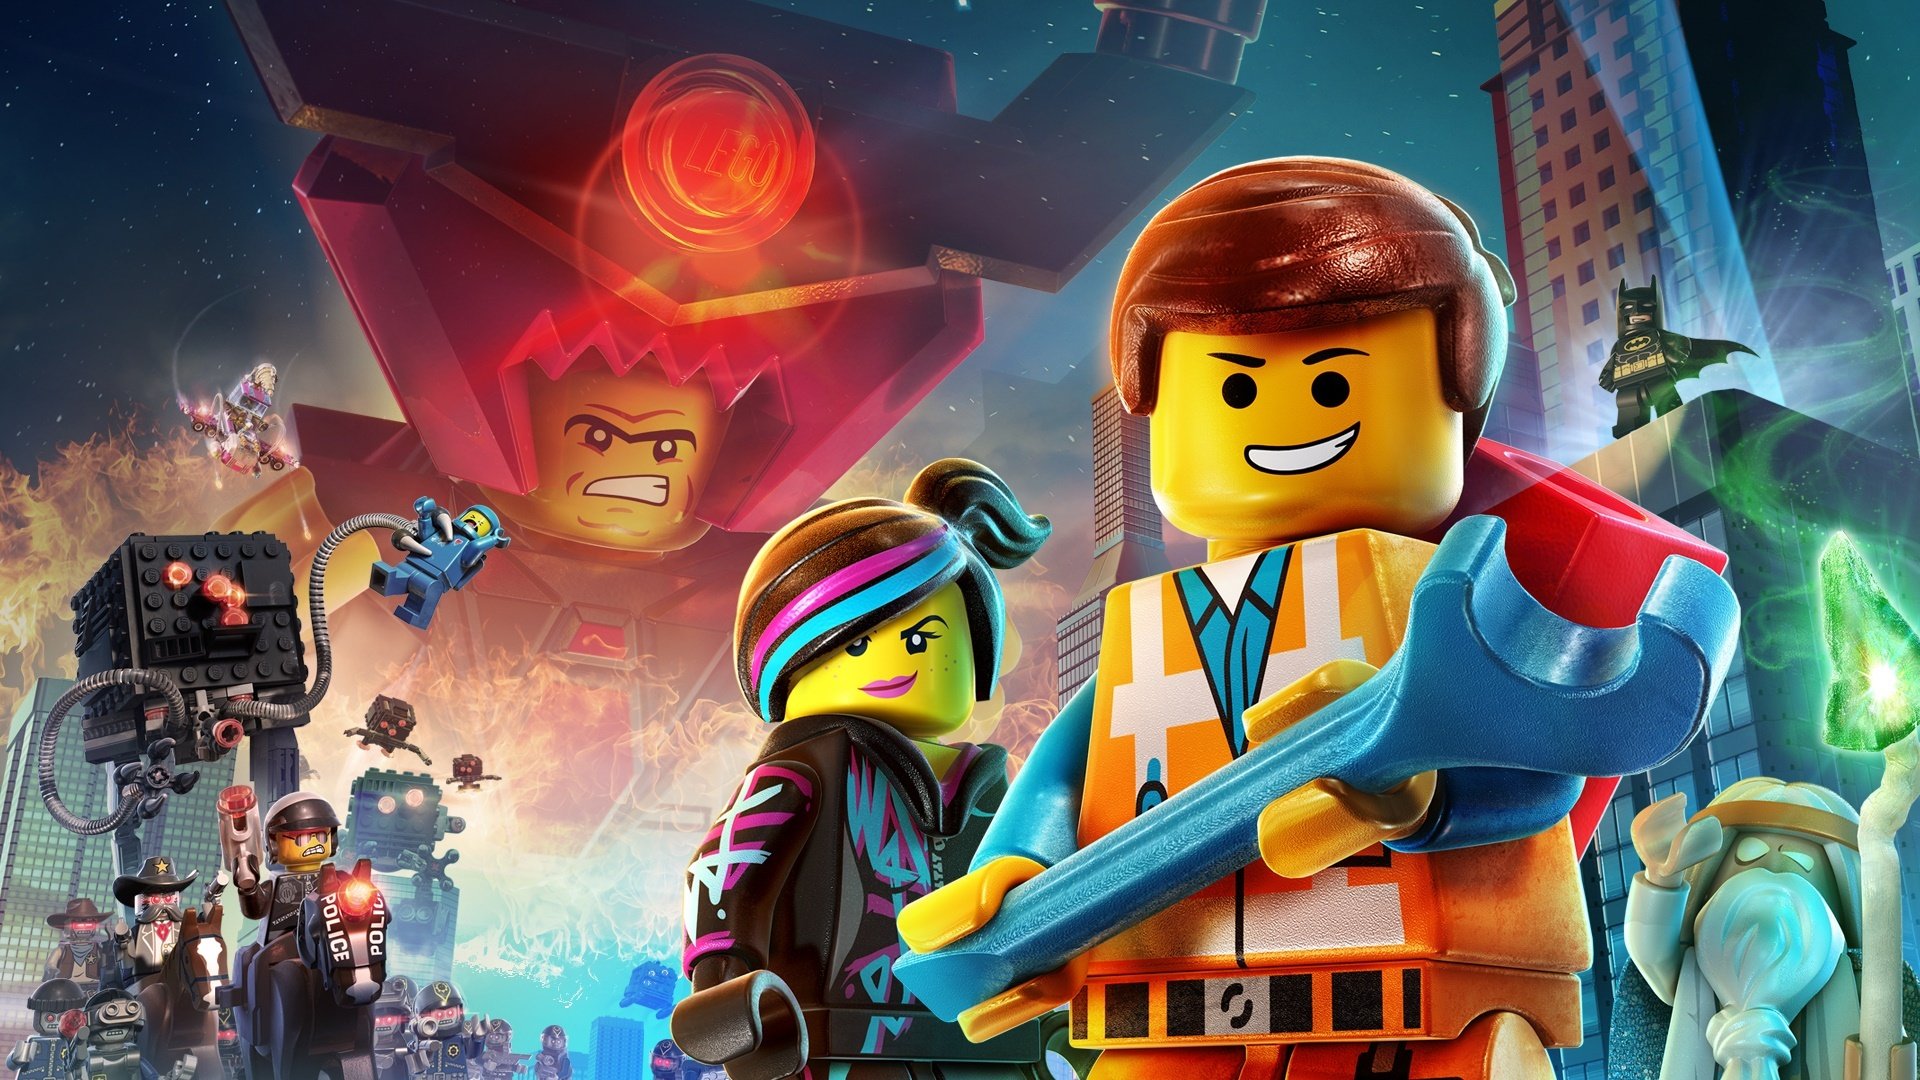 Free HD The Lego Movie Wallpapers amp Desktop Backgrounds 1920x1080